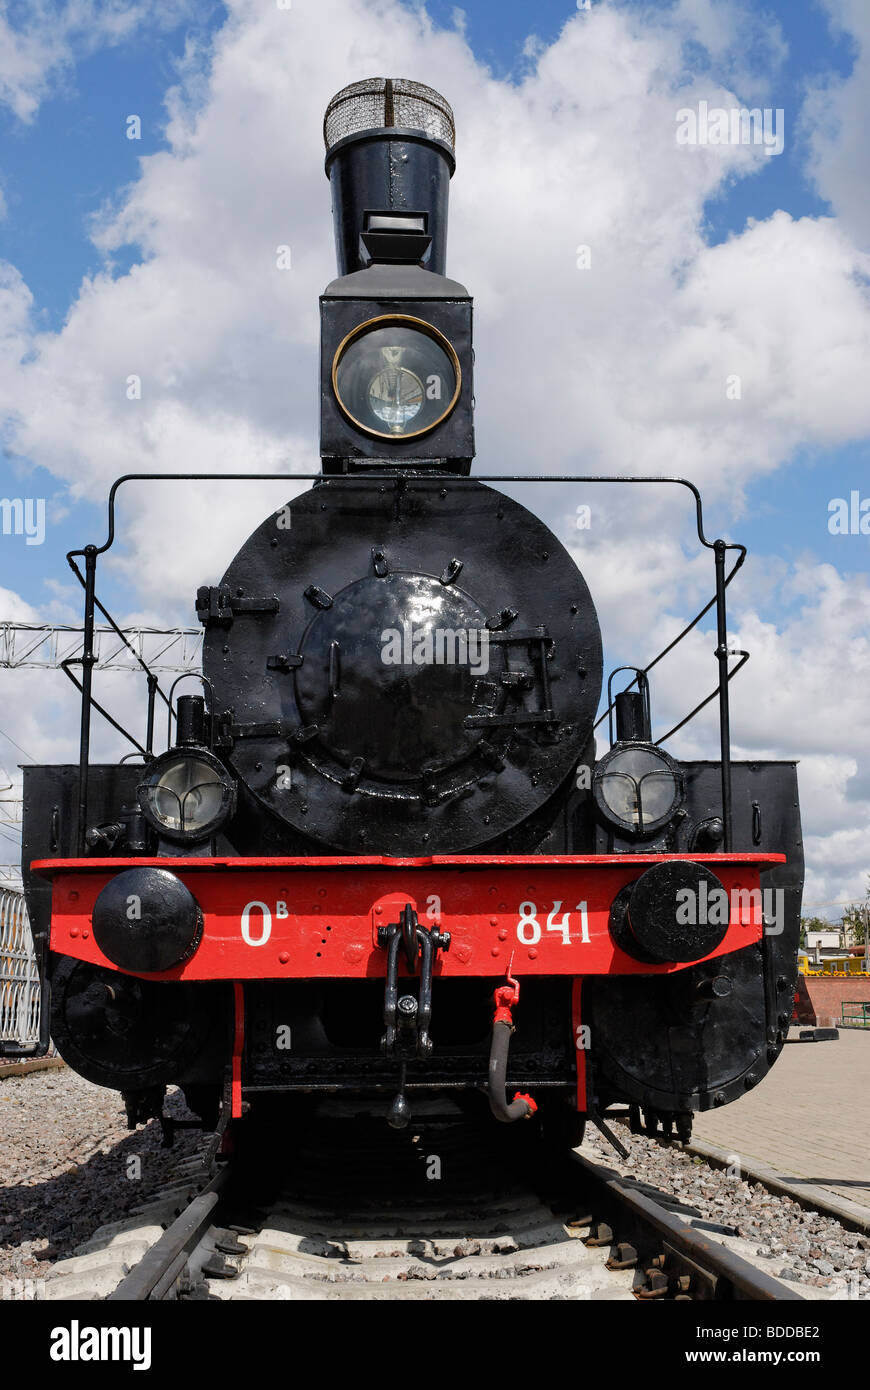 Front view of Russian retro stam locomotive Ov-841. Built in 1903 Stock ...